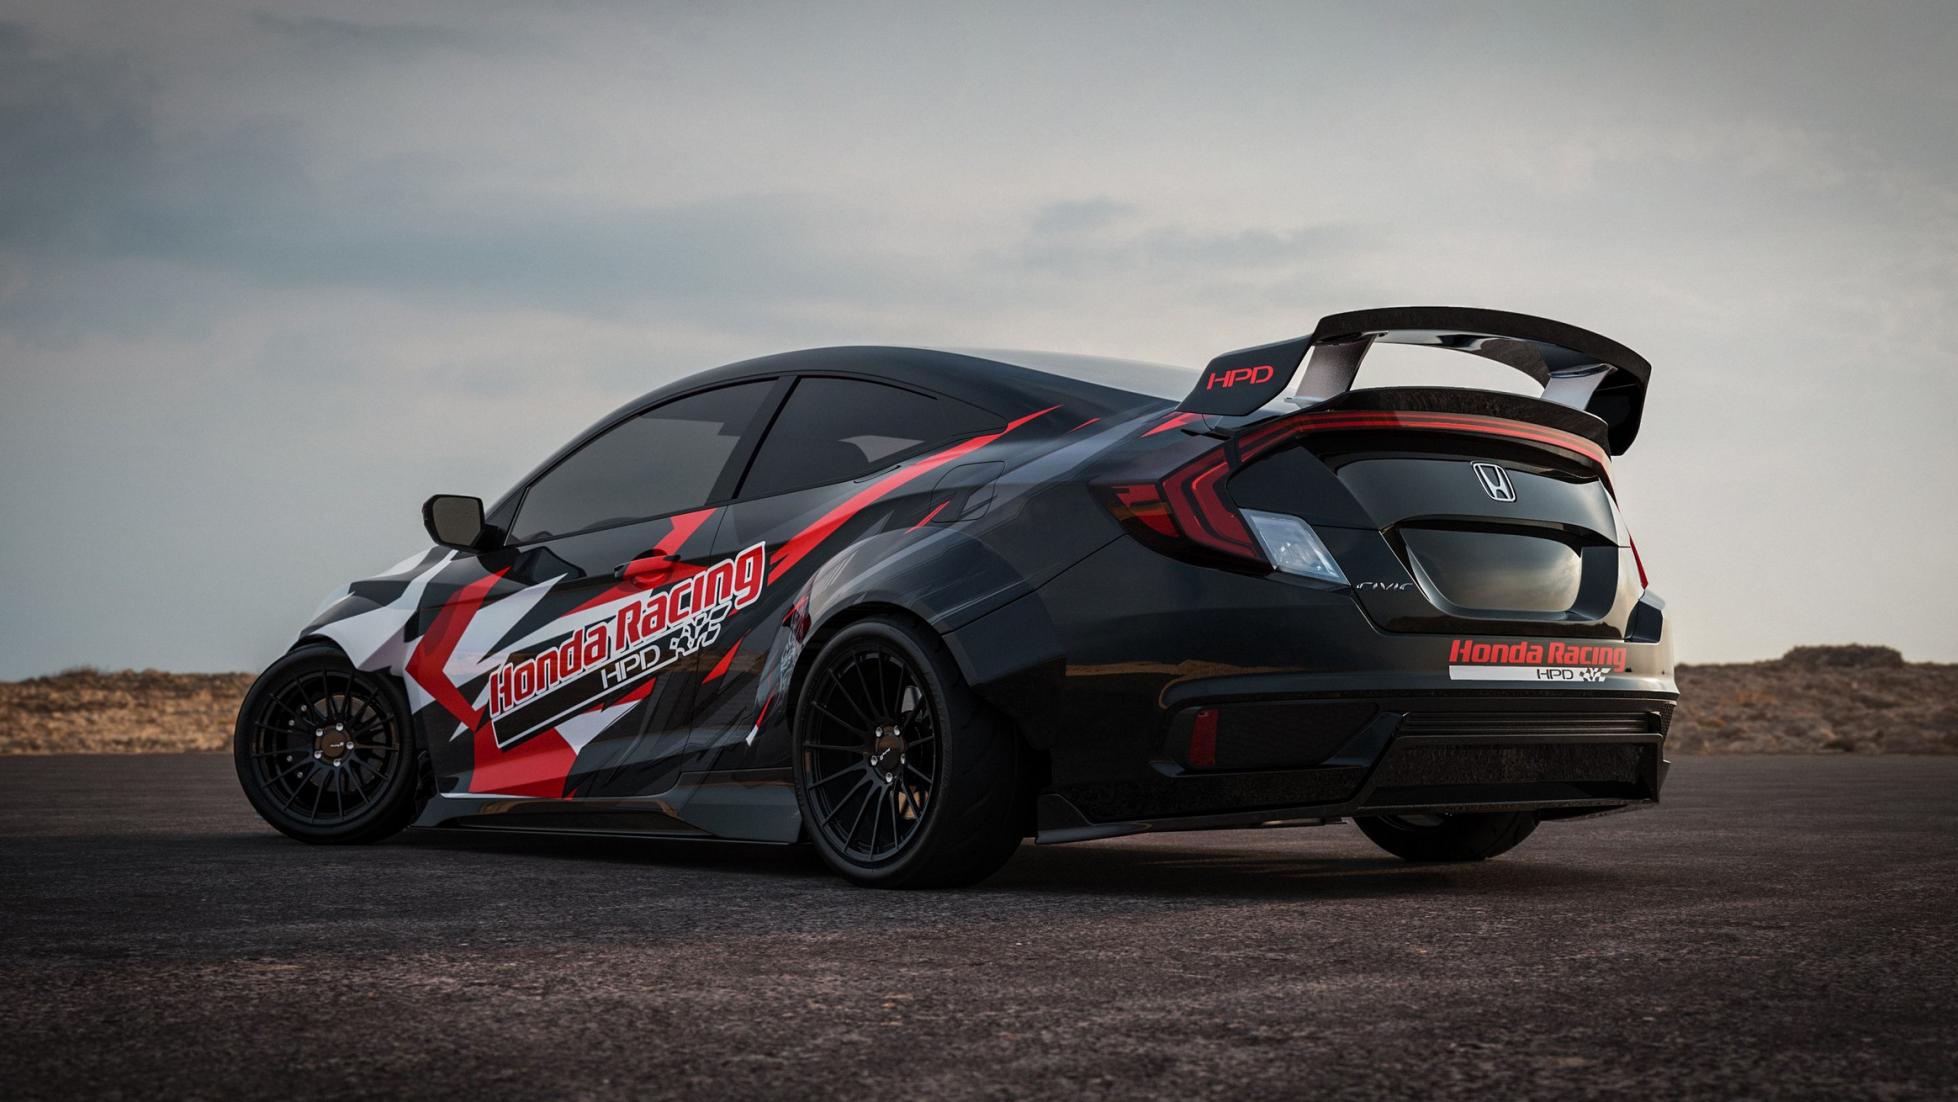 Honda is bringing an ‘Outlaw’ S800 Coupe to the SEMA Show